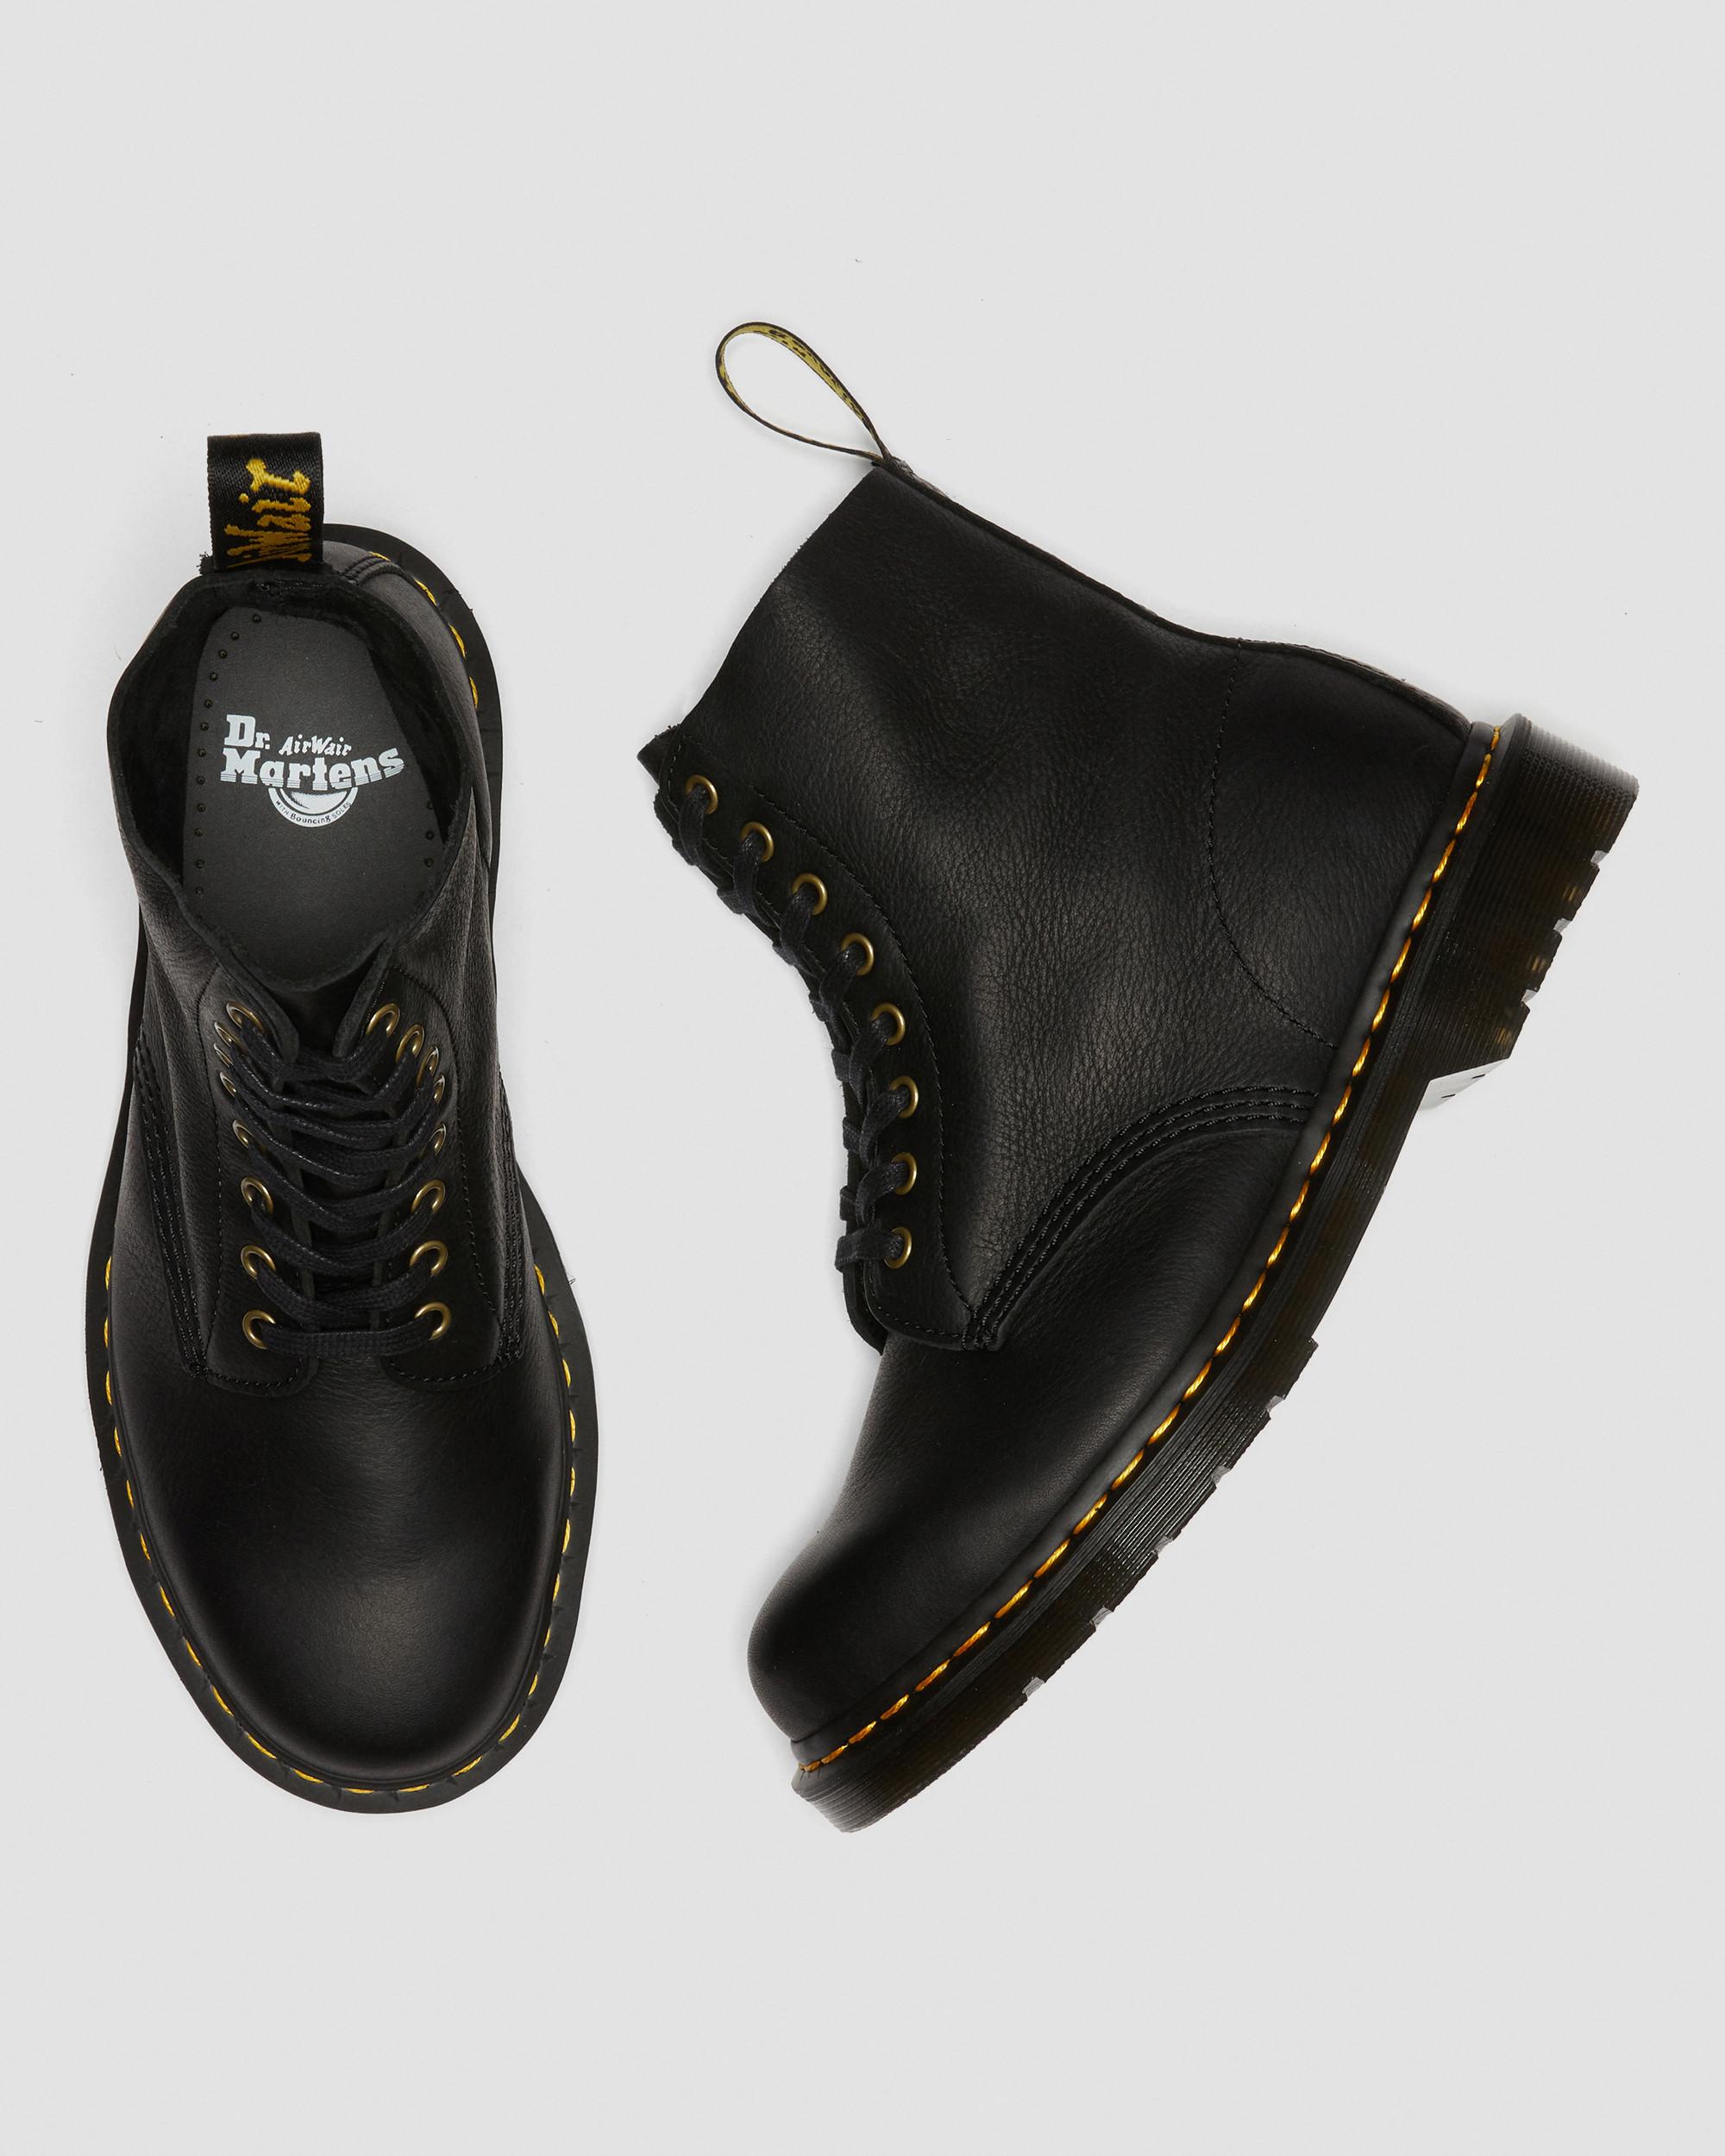 DR MARTENS '1461' Oxford Shoes in Peppermint Smooth